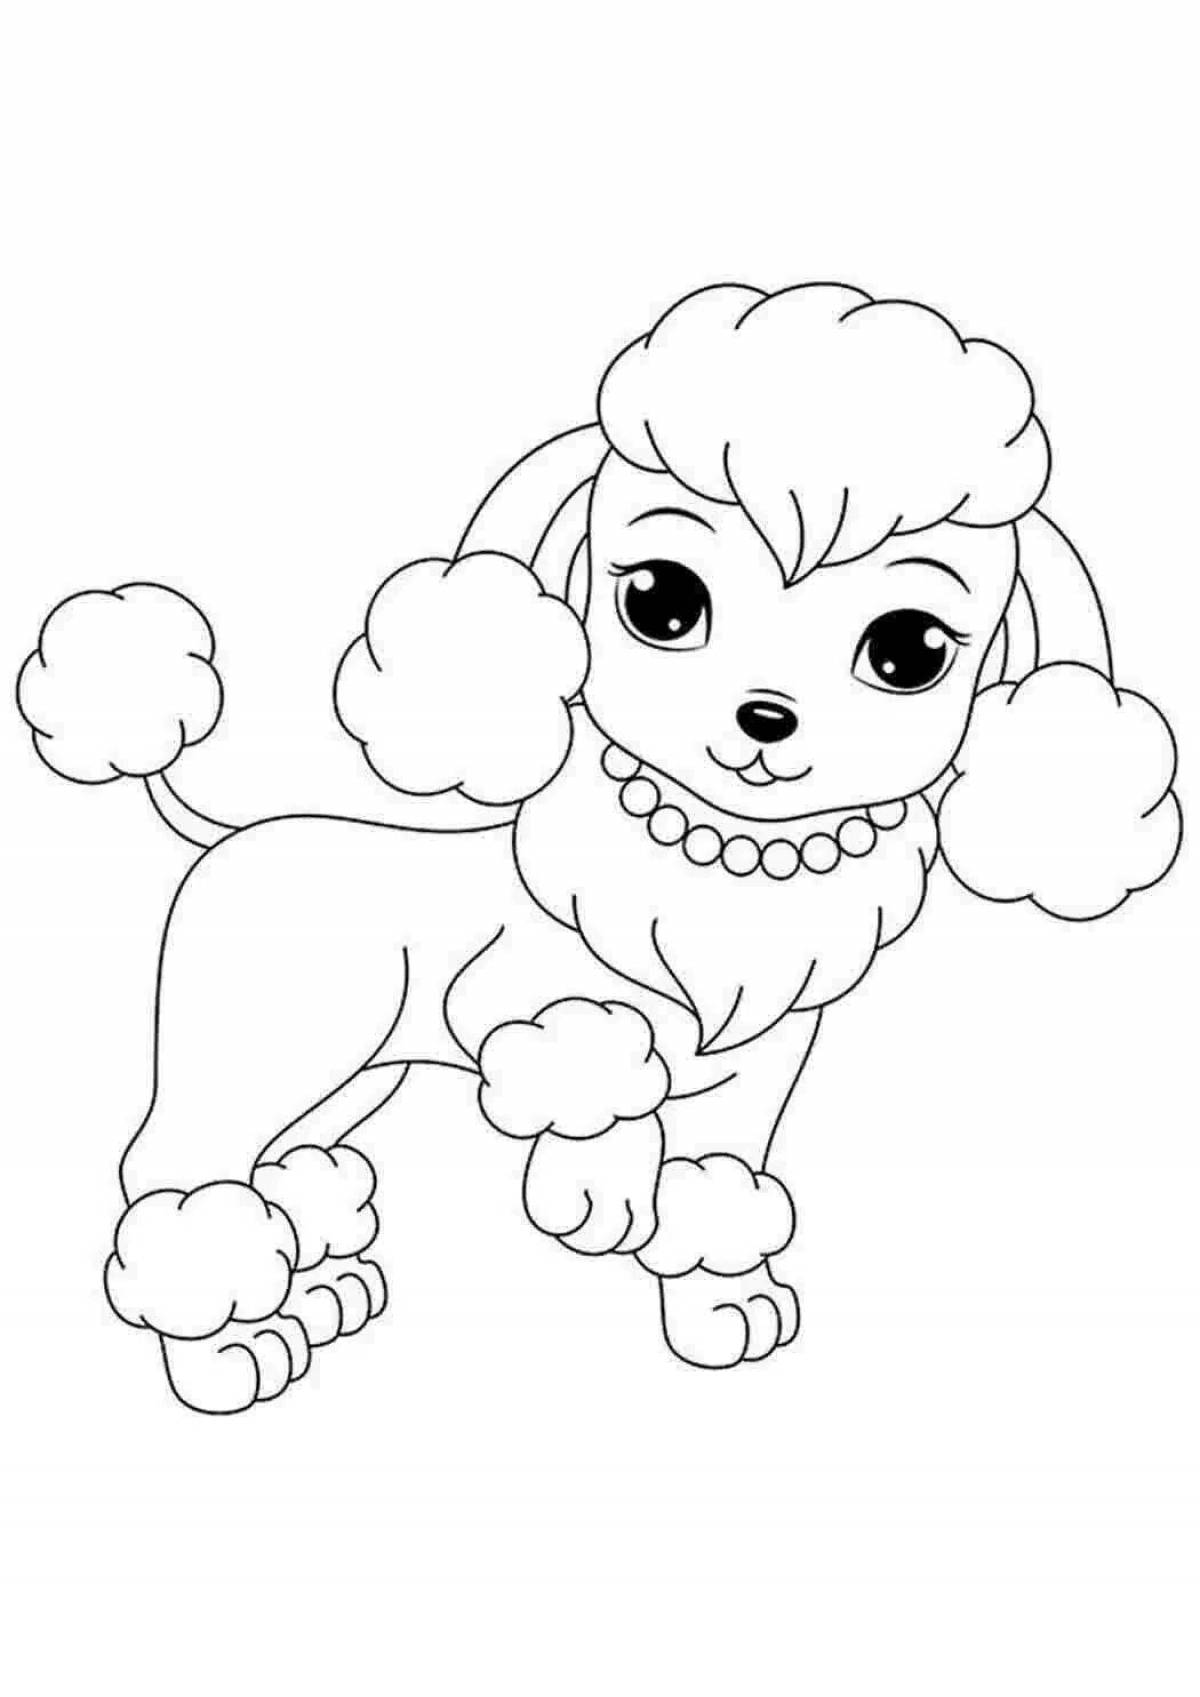 Glowing Cute Dog Coloring Page for Girls